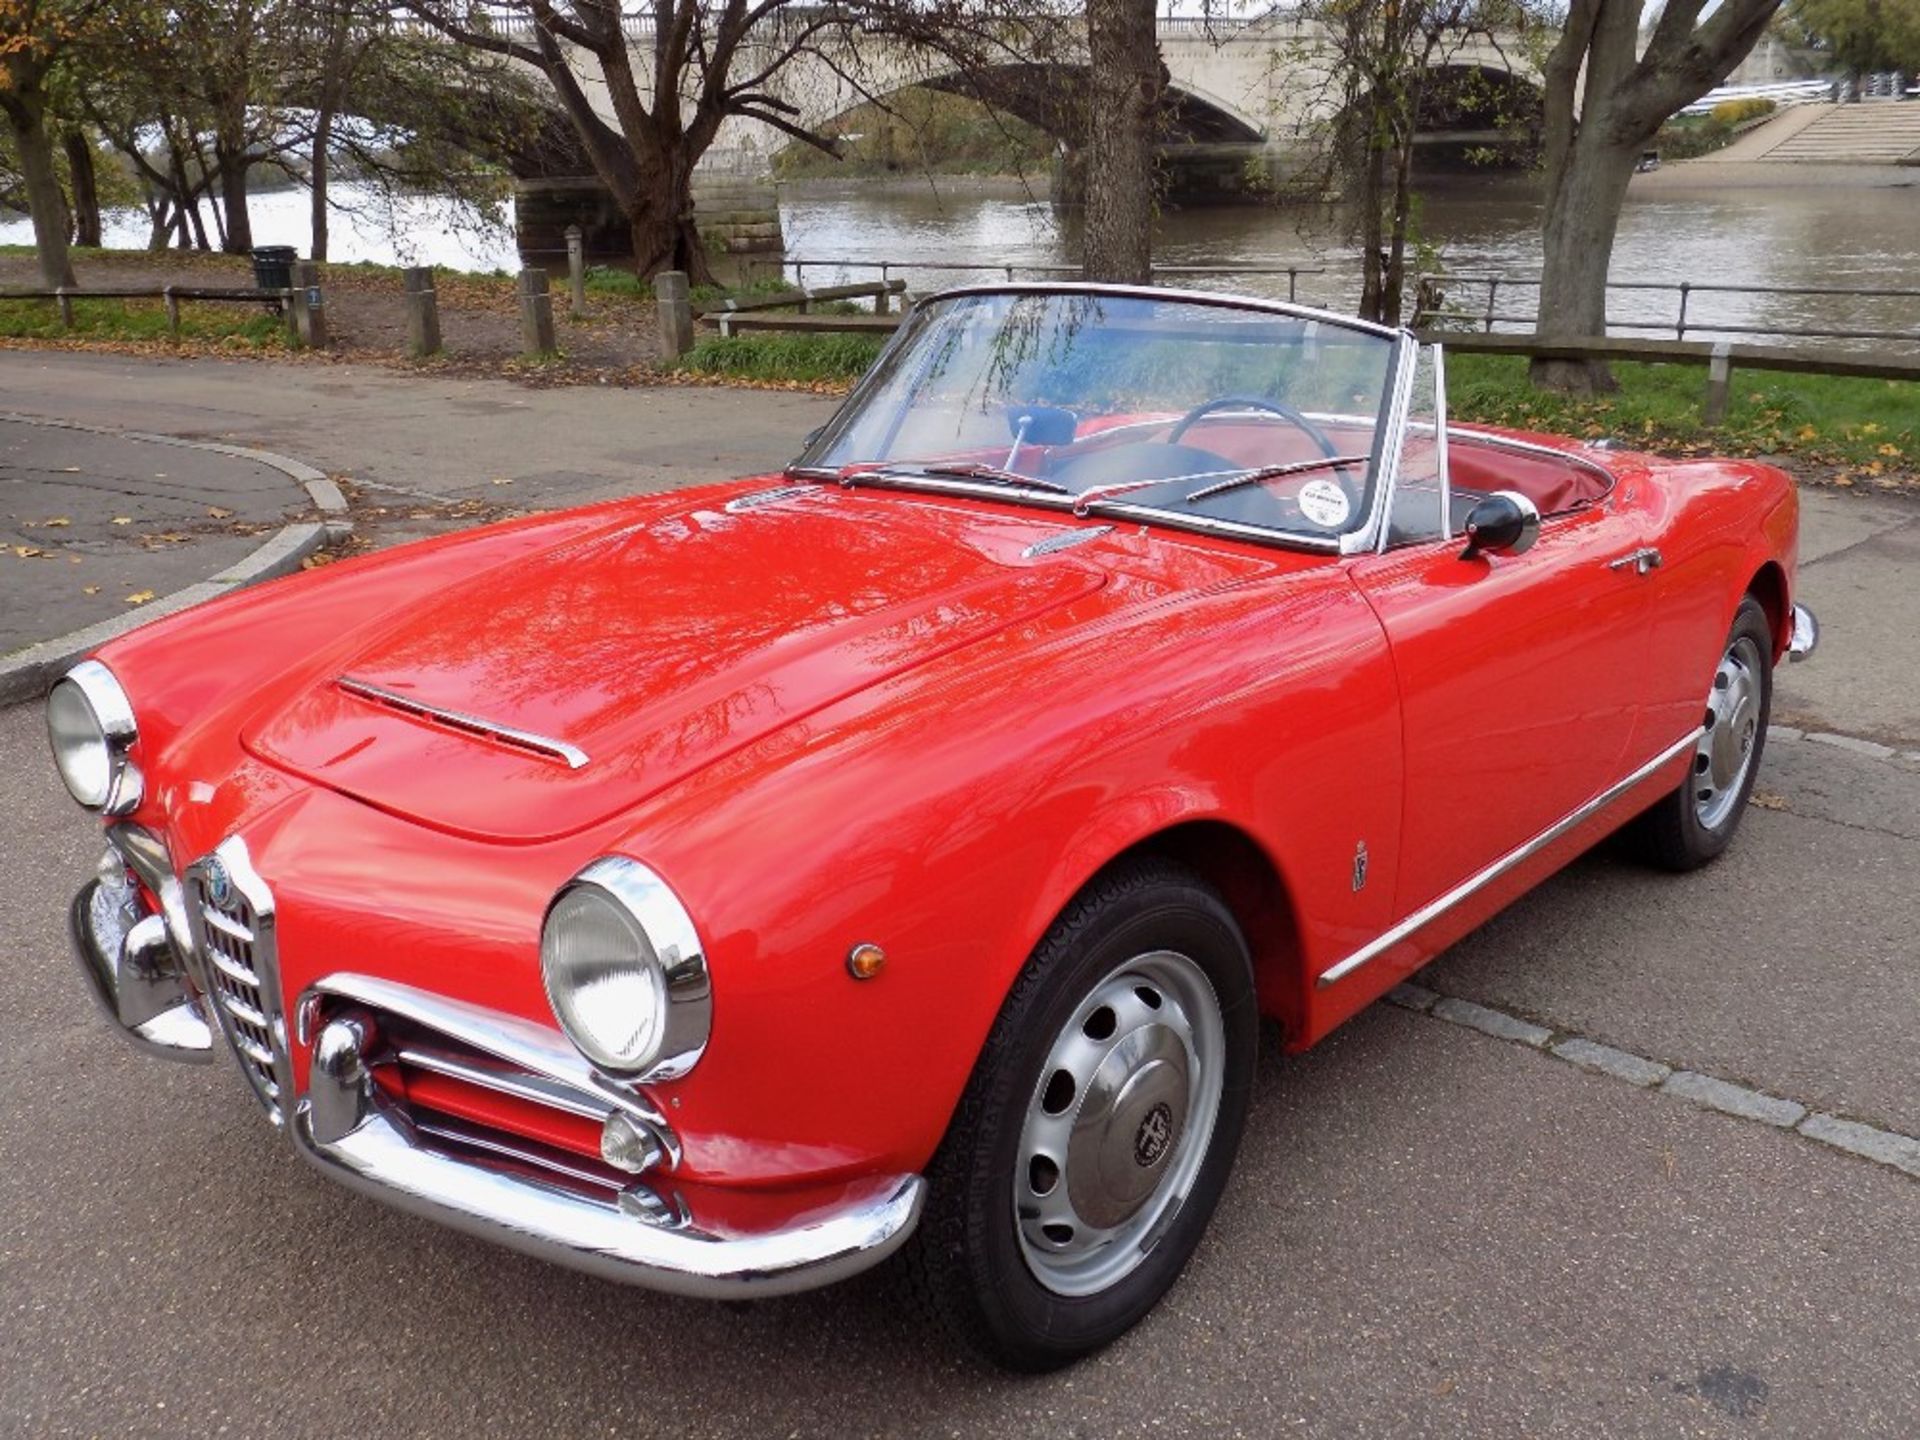 1964 ALFA-ROMEO GIULIA (101) SPIDER Registration Number: DAP 534B Chassis Number: AR 378844 Recorded